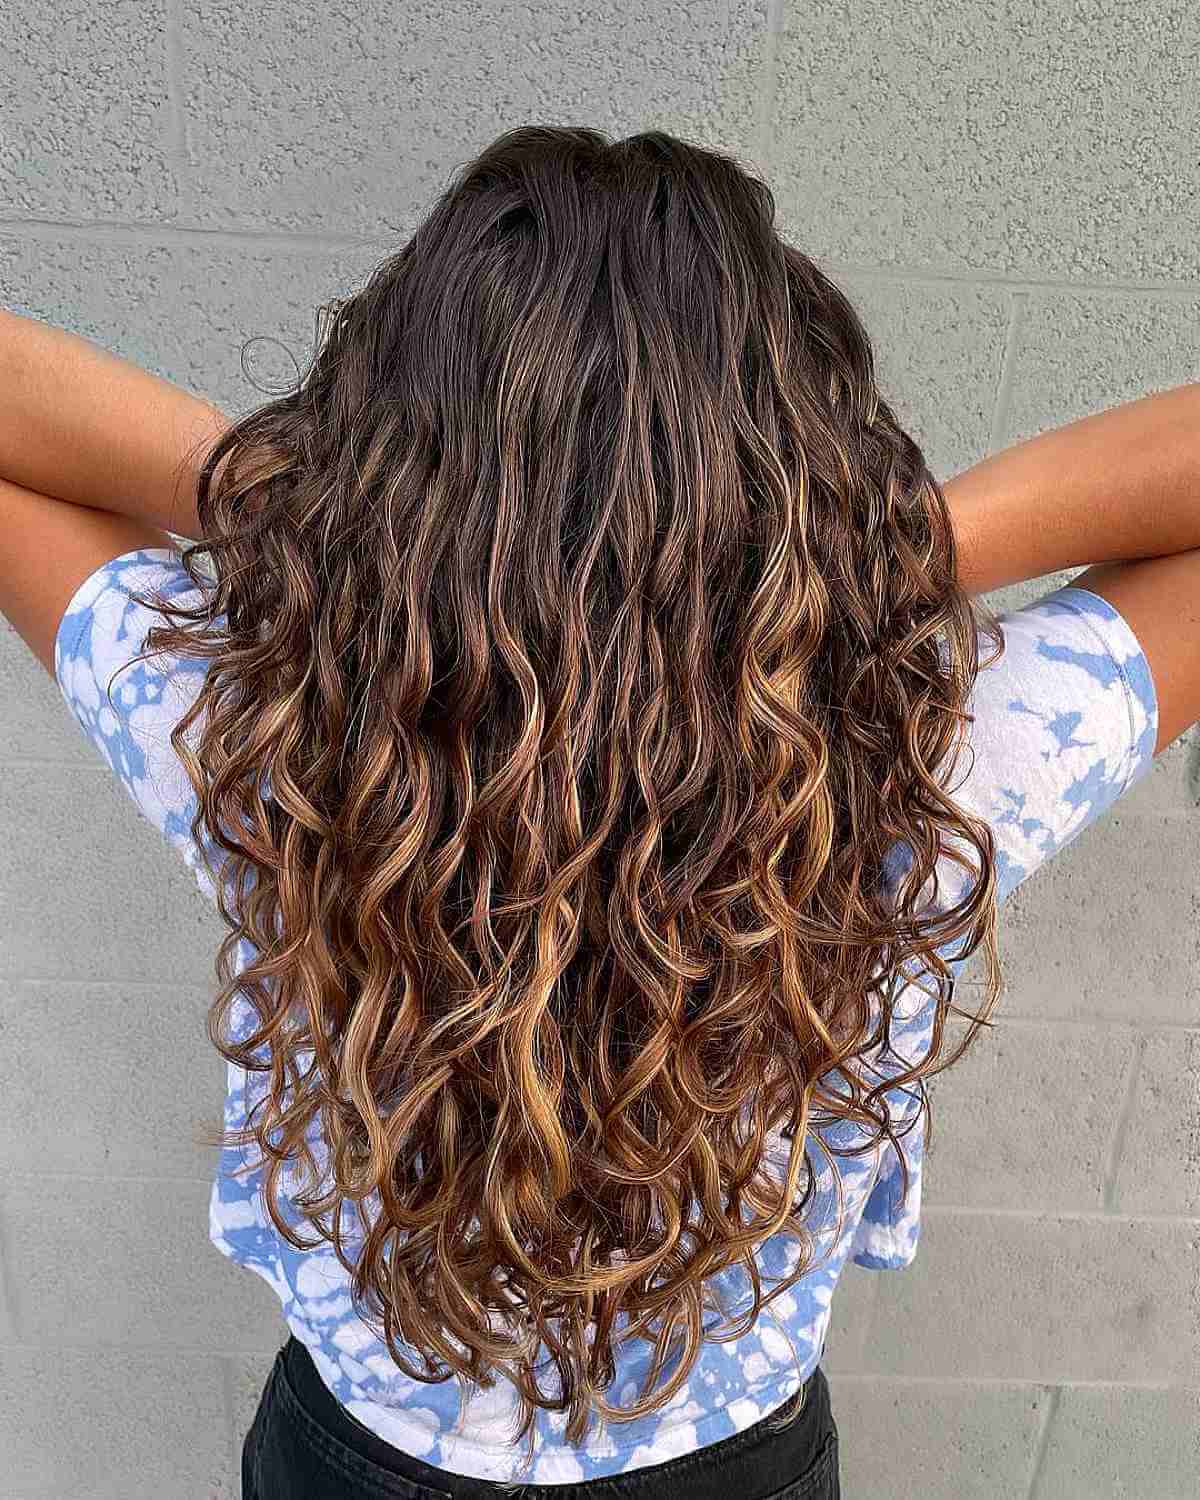 Chunky Blonde Highlights on Curly Light Brown Hair